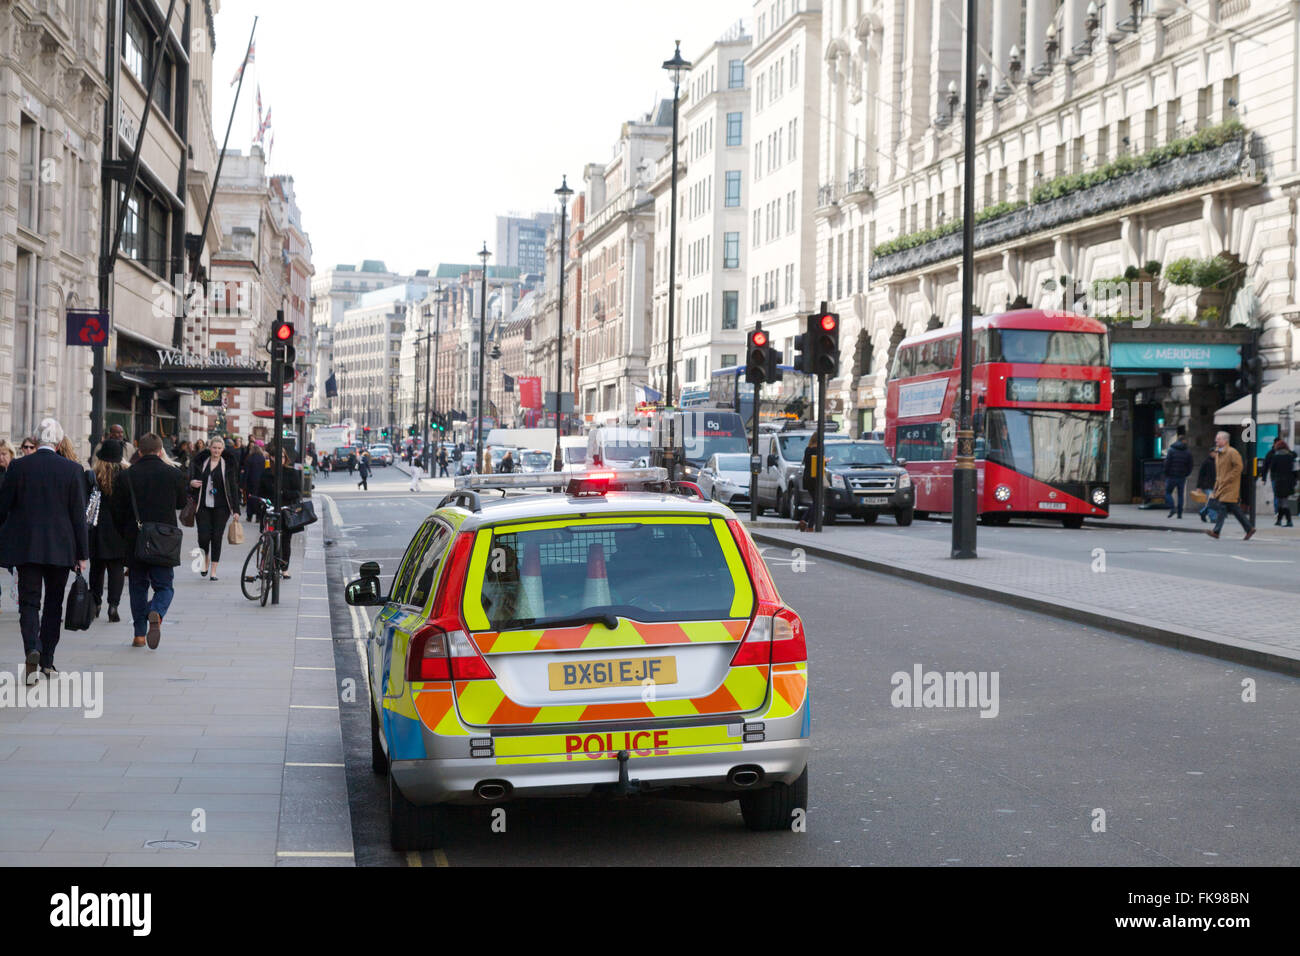 London Police car; A police car on Piccadilly, central London city centre UK Stock Photo